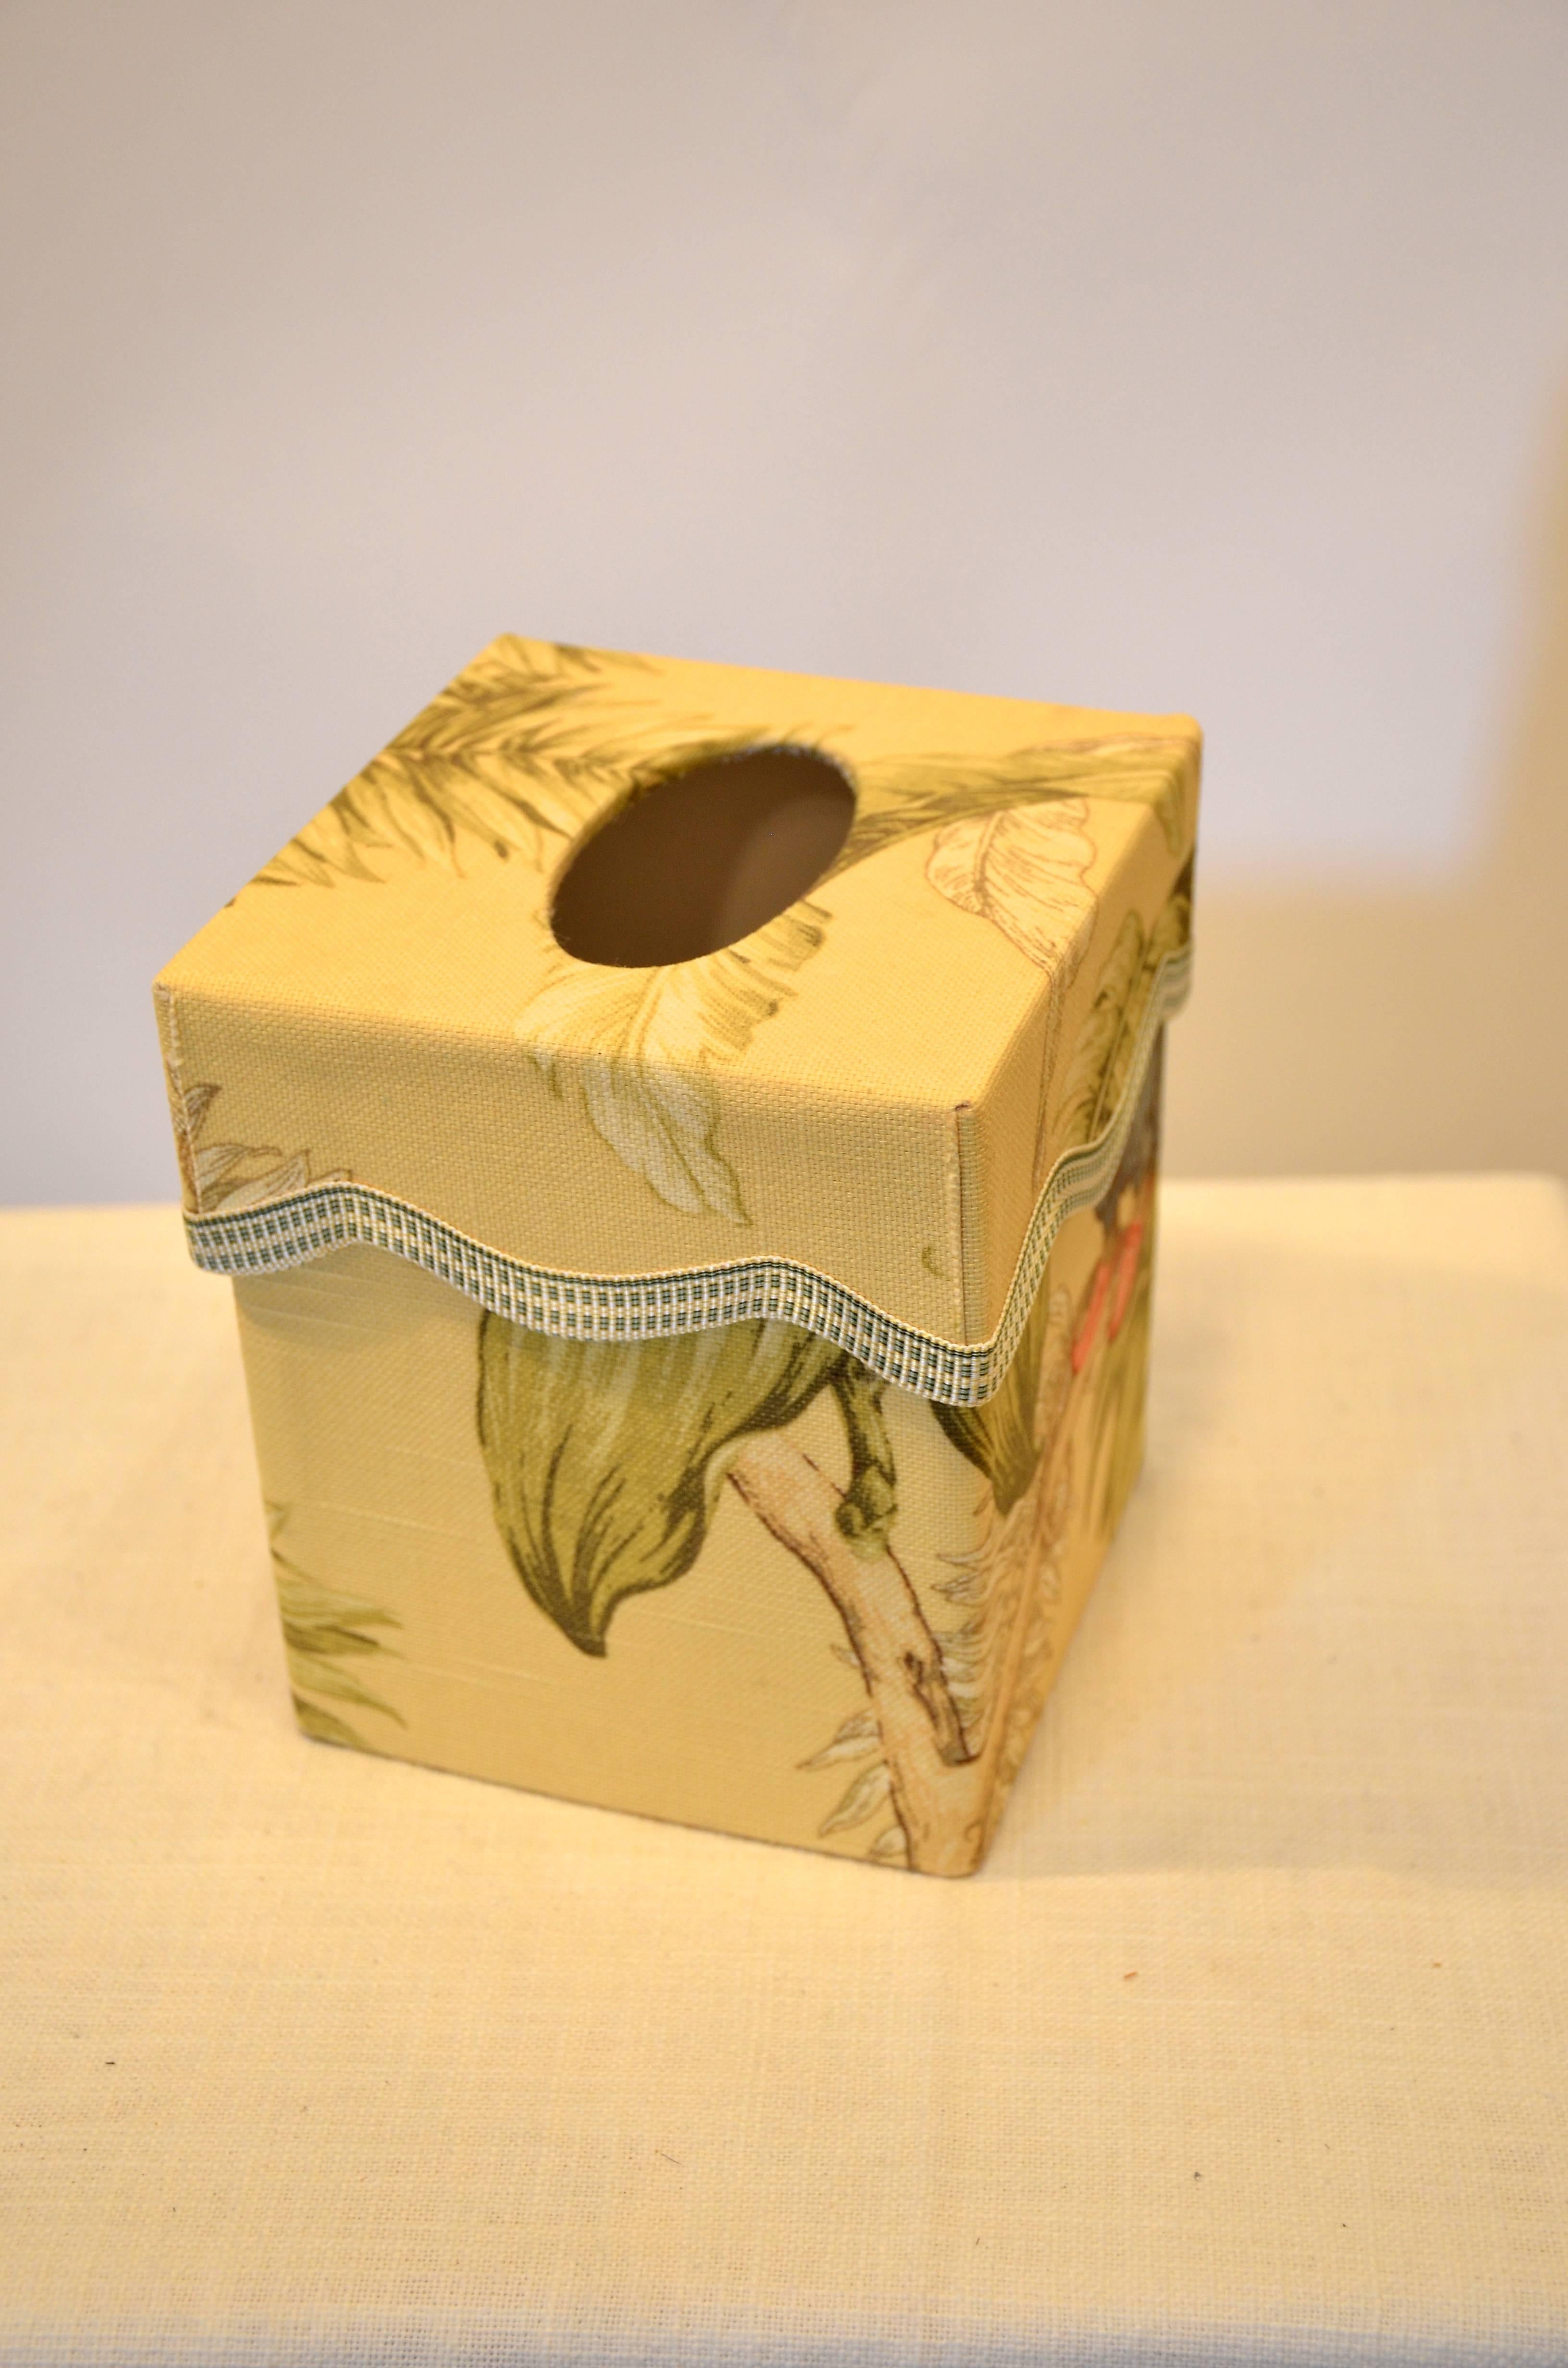 Tissue Box Cover In Good Condition For Sale In Southampton, NY